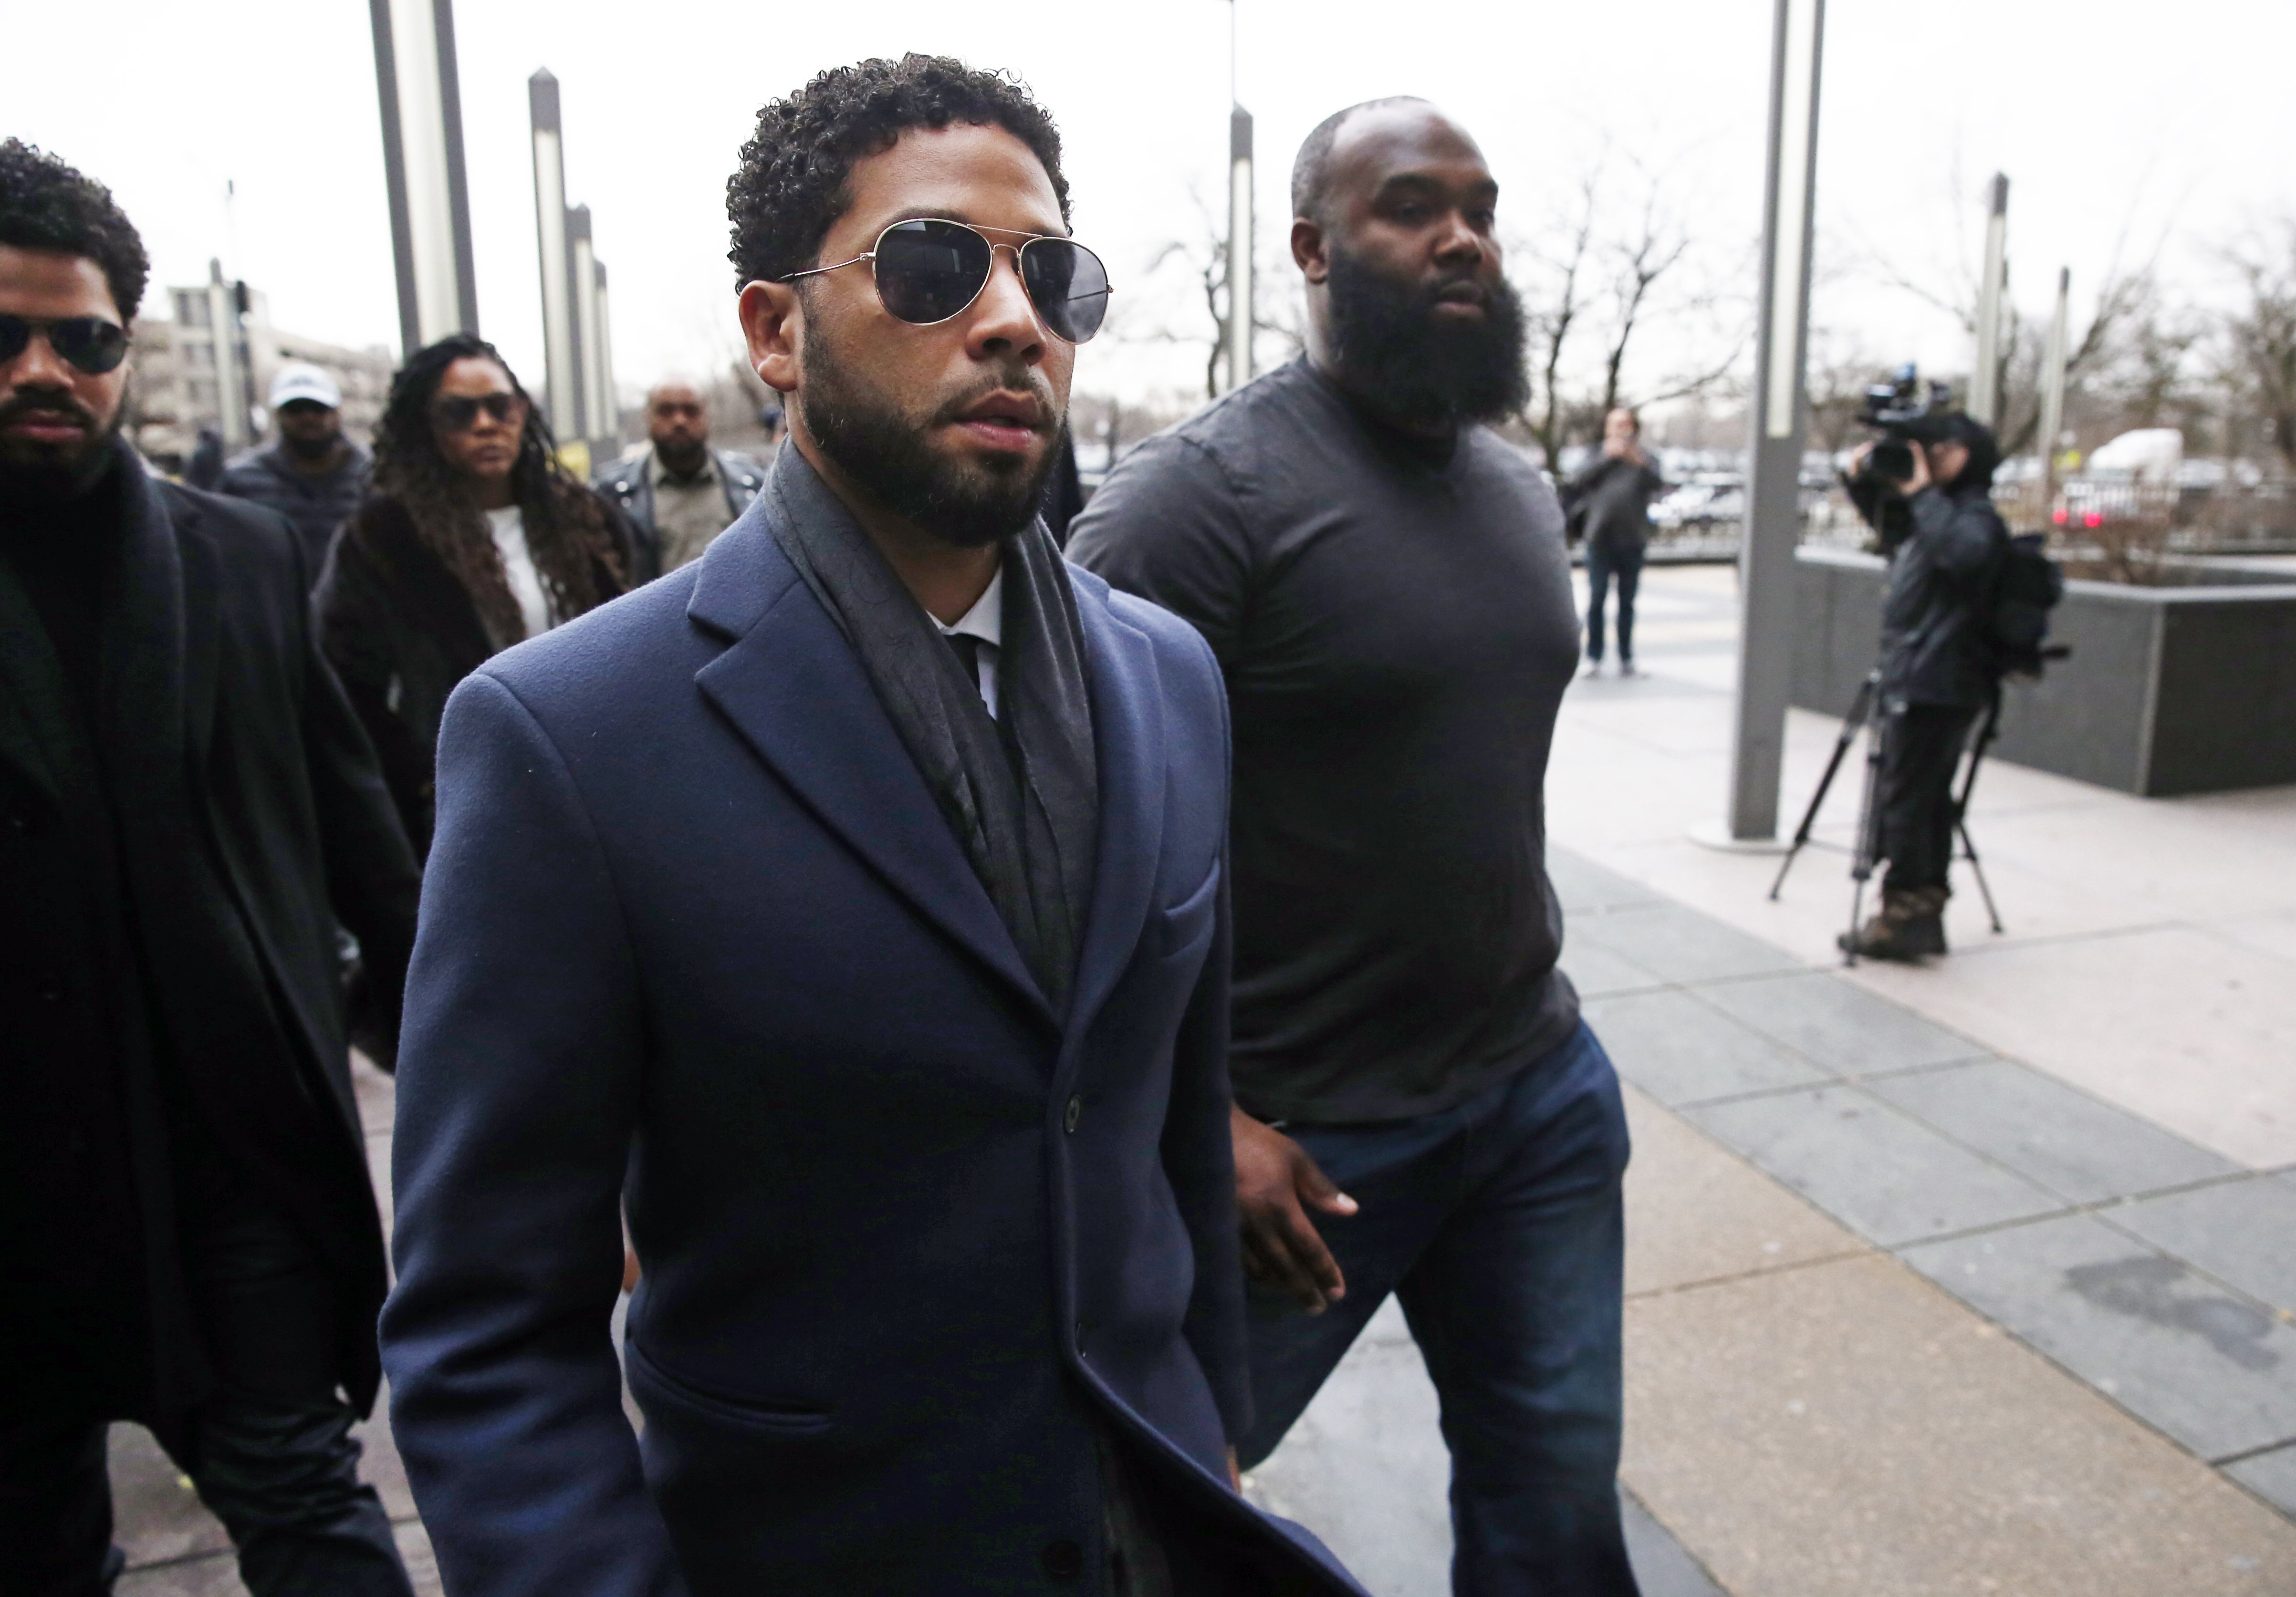 Jussie Smollett arrives at a courthouse in Chicago, Illinois on March 14 | Photo: Getty Images